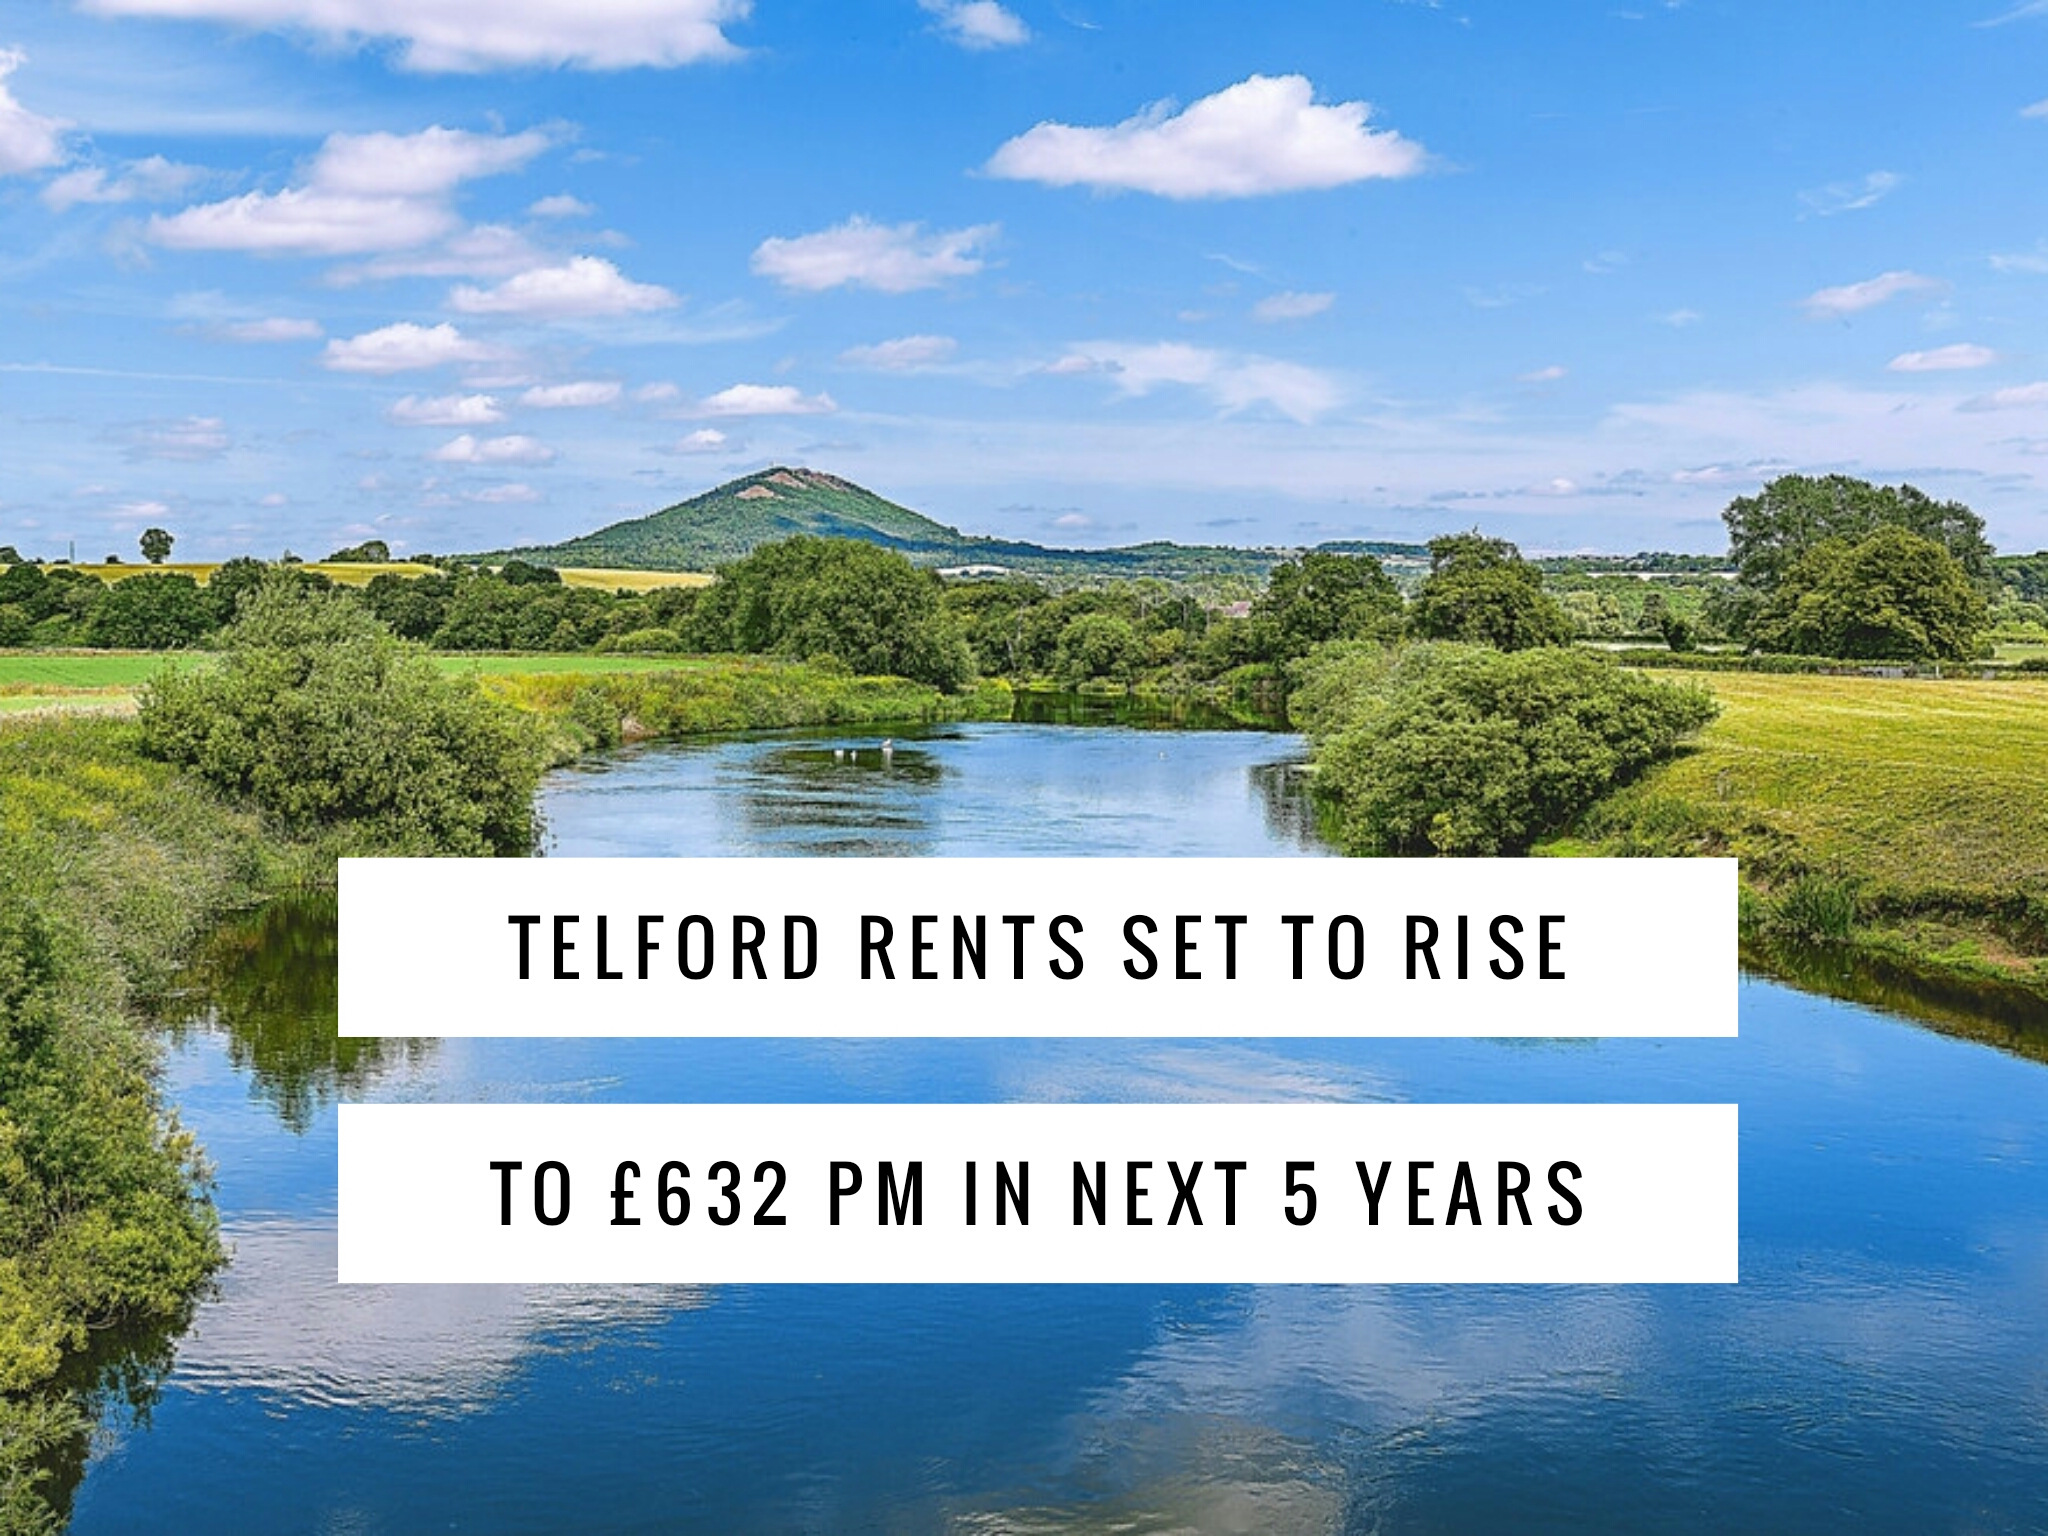 Telford Rents Set to Rise to £632 pm in Next 5 Years